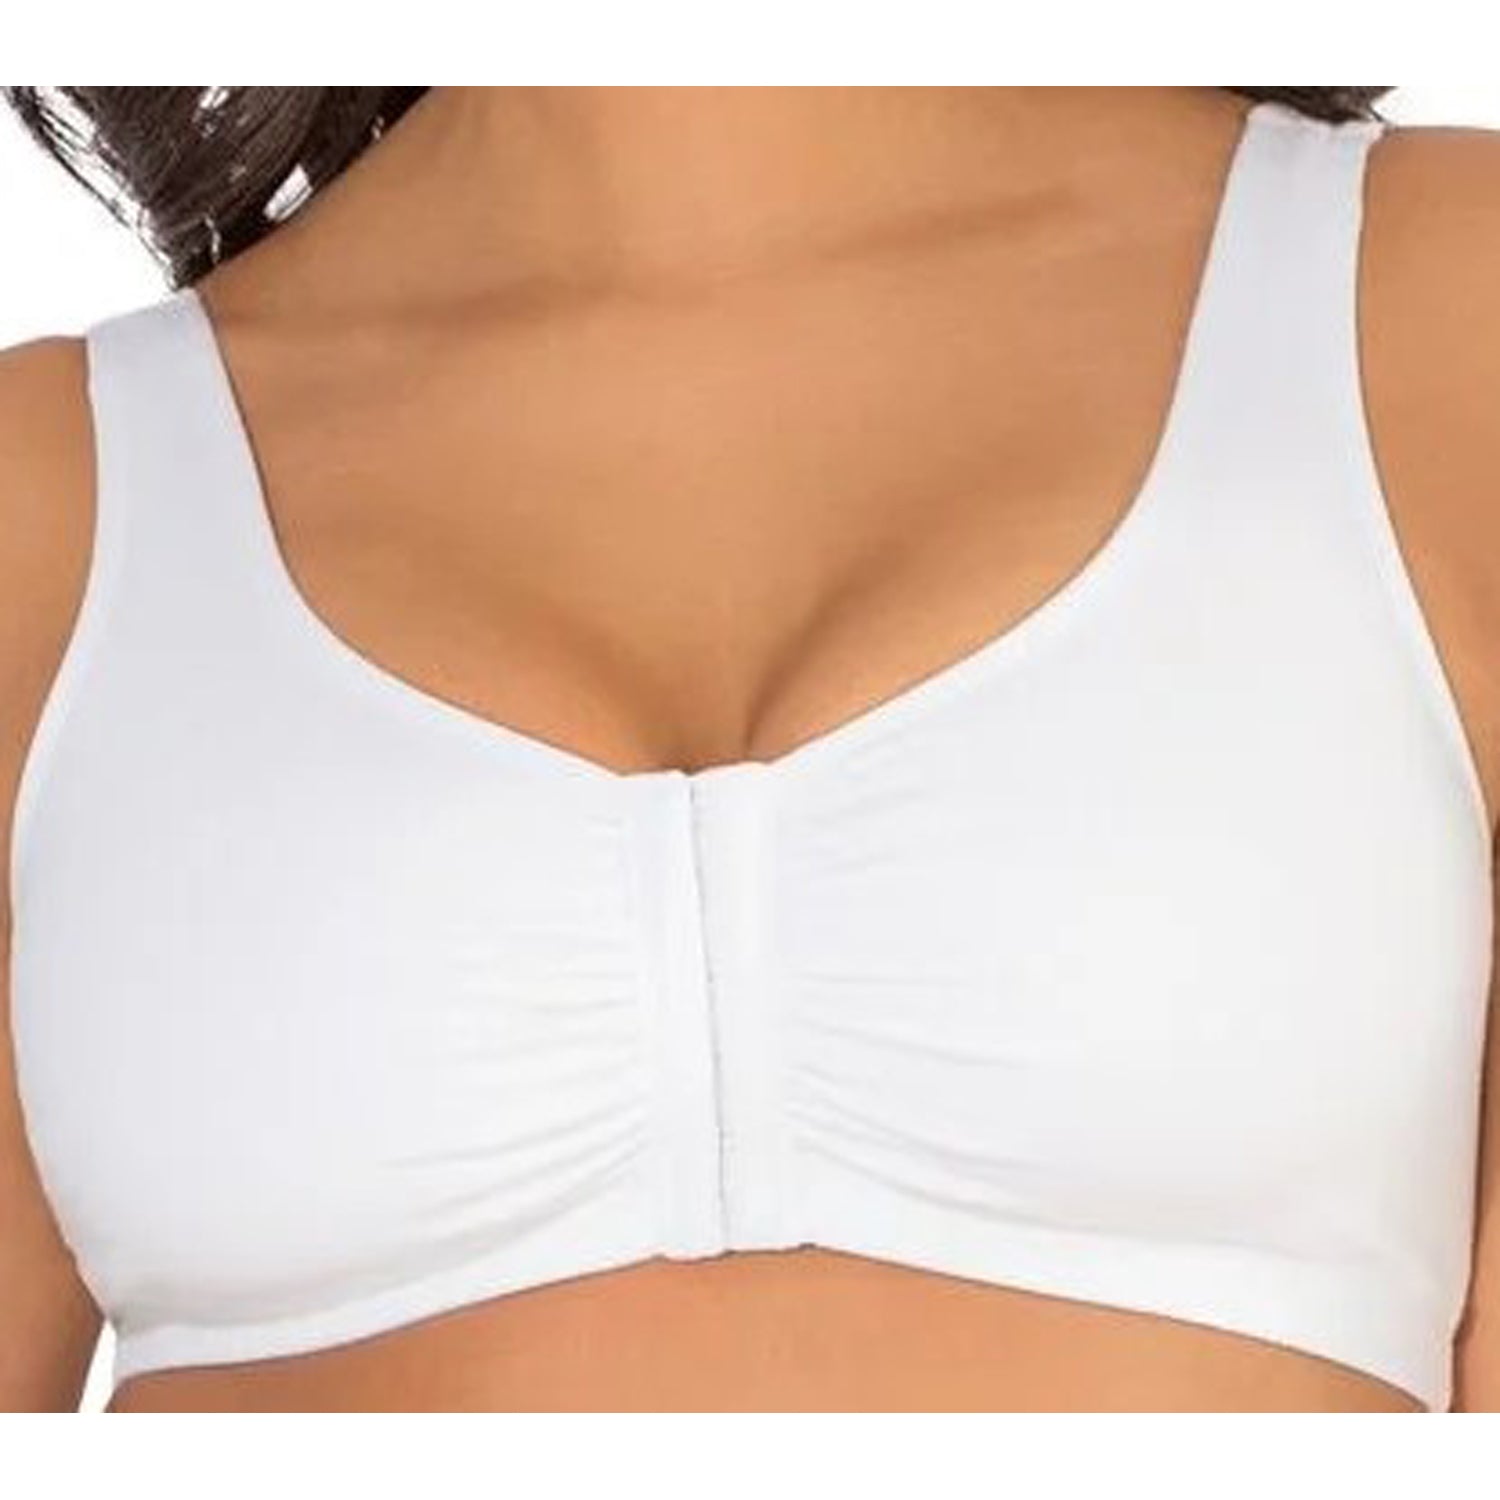 Fruit of the Loom Women's Beyond Soft Front Closure Cotton Bra